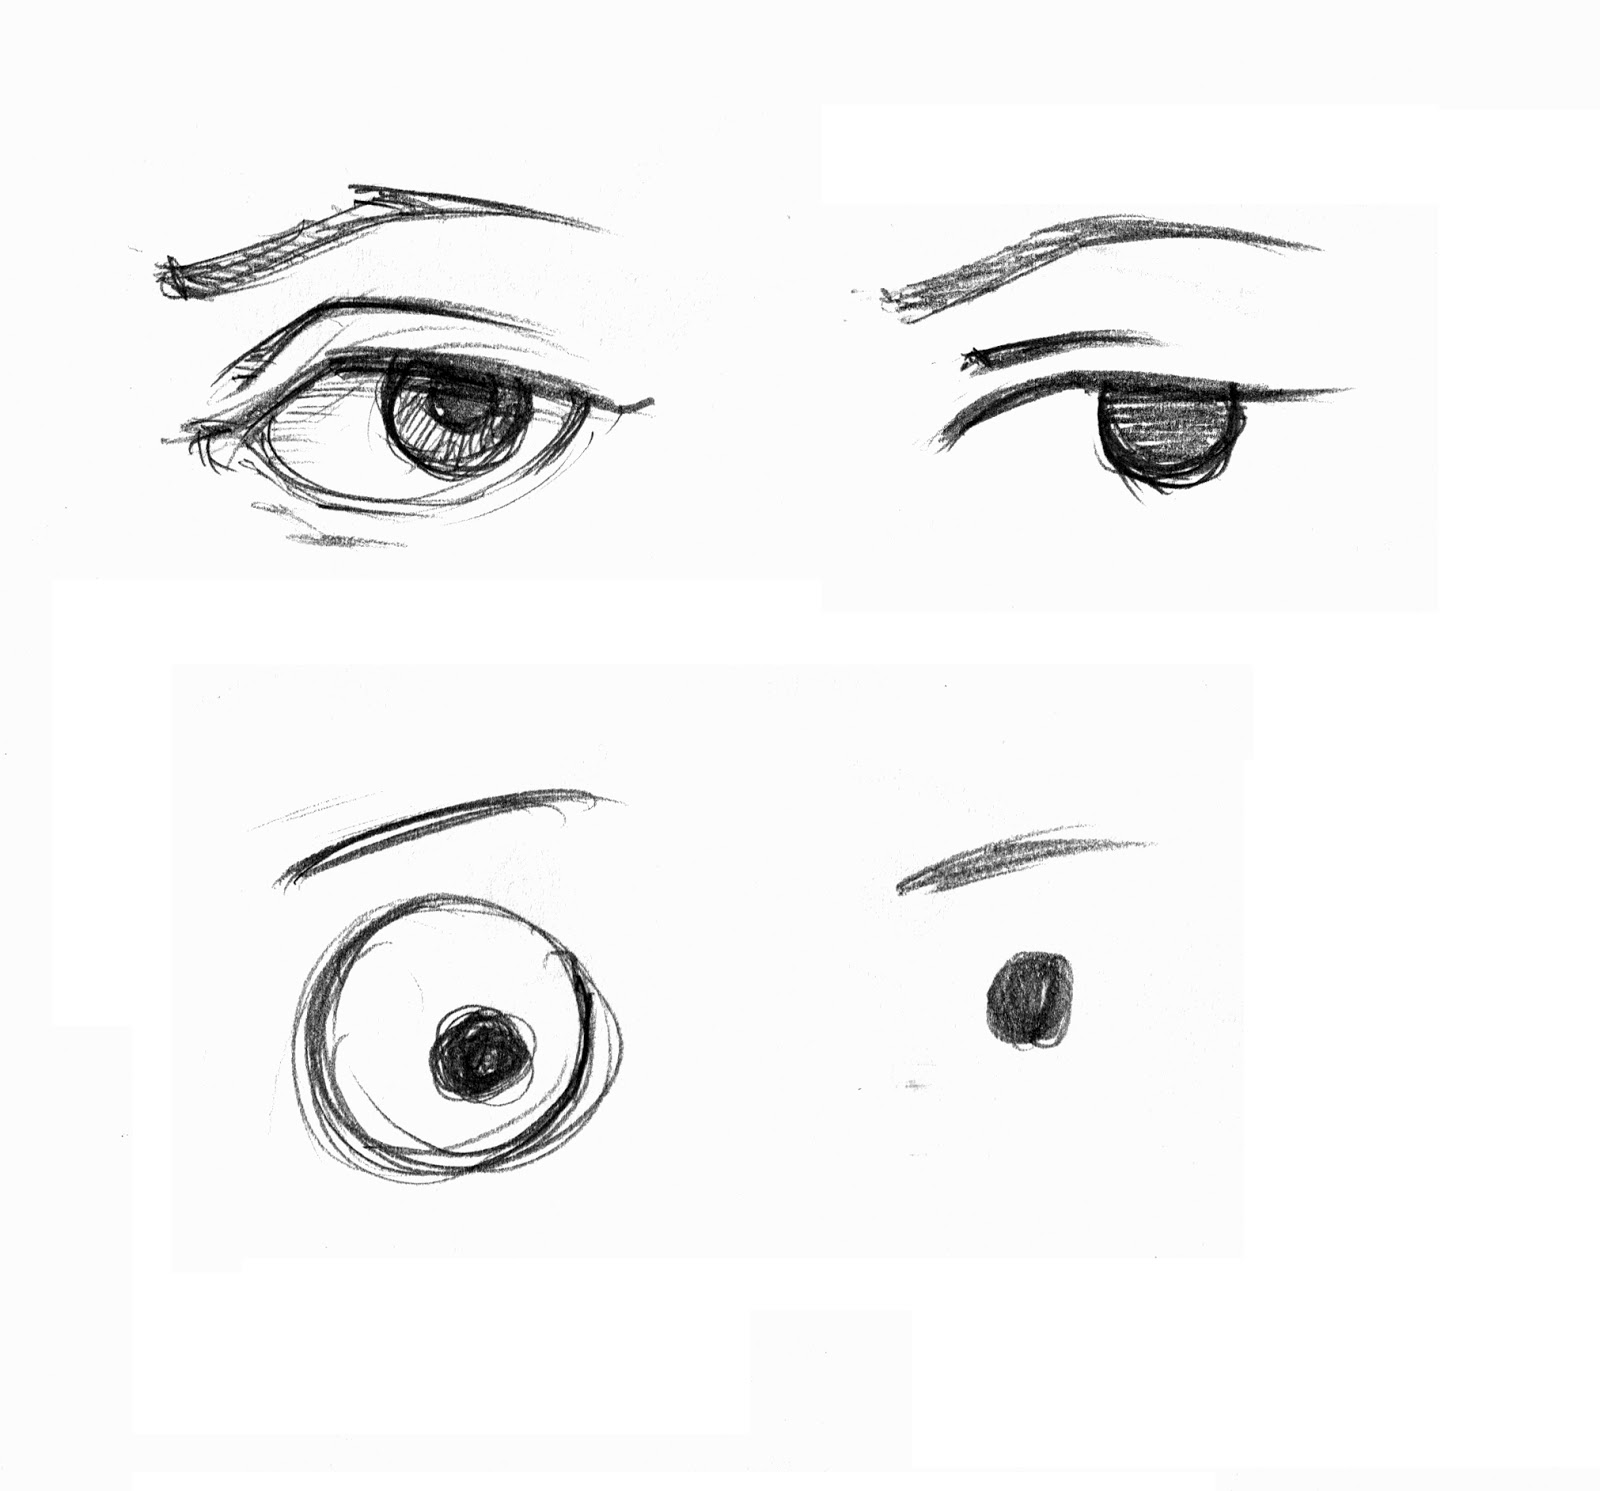 Brett Helquist: DRAWING LESSON: HOW TO DRAW EYES